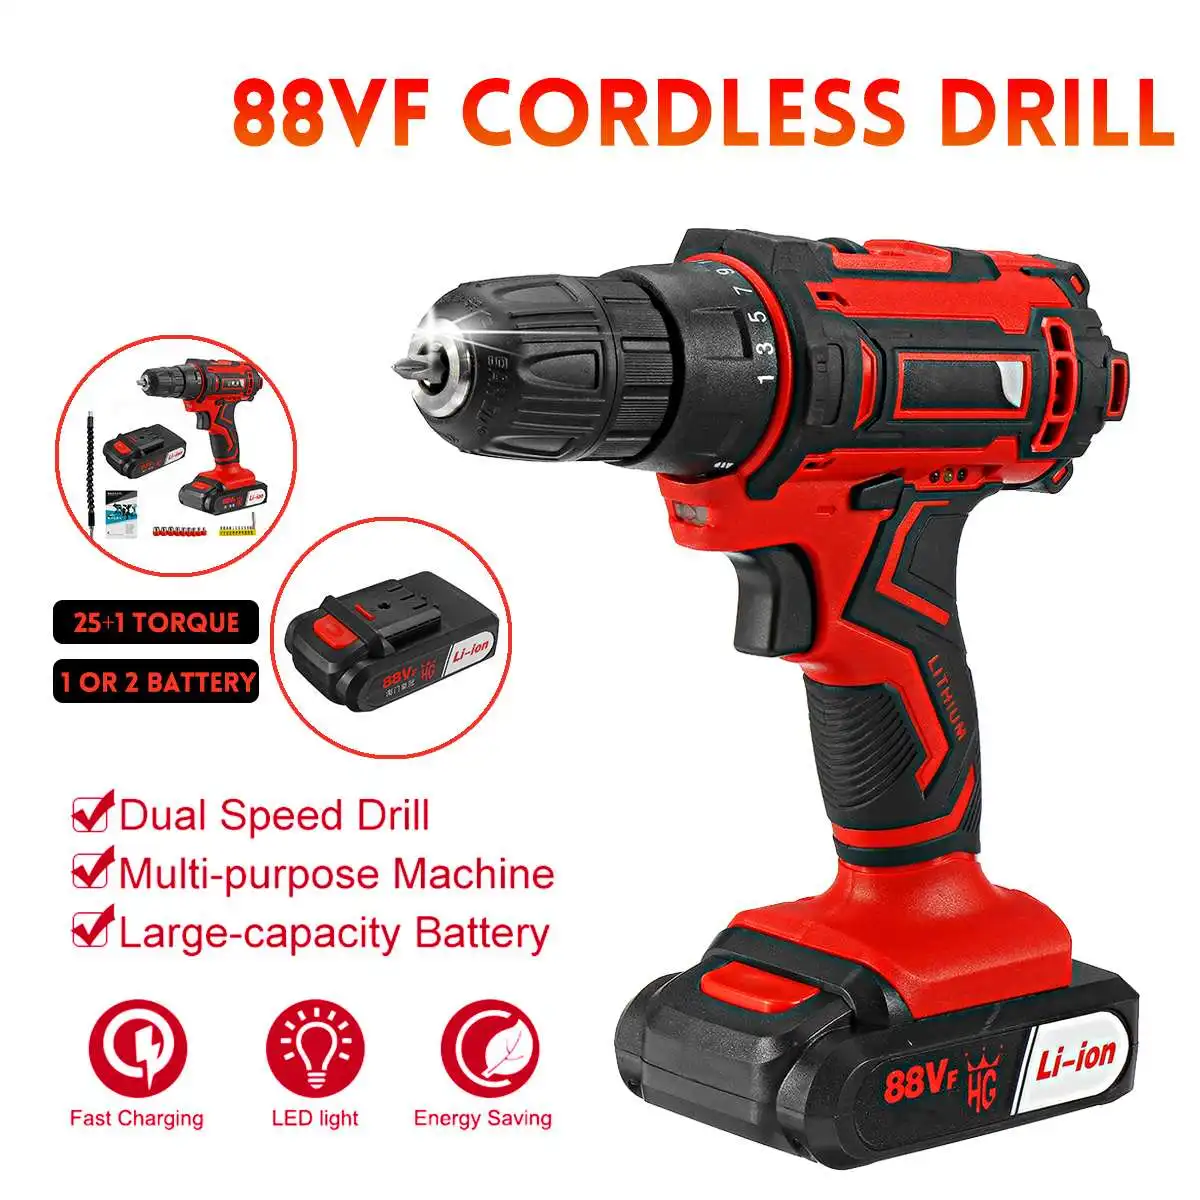 

88VF Cordless Electric Drill Screwdriver 25+1 Torque Wireless Power Driver Power Tools With Work Light & 1or 2 Battery